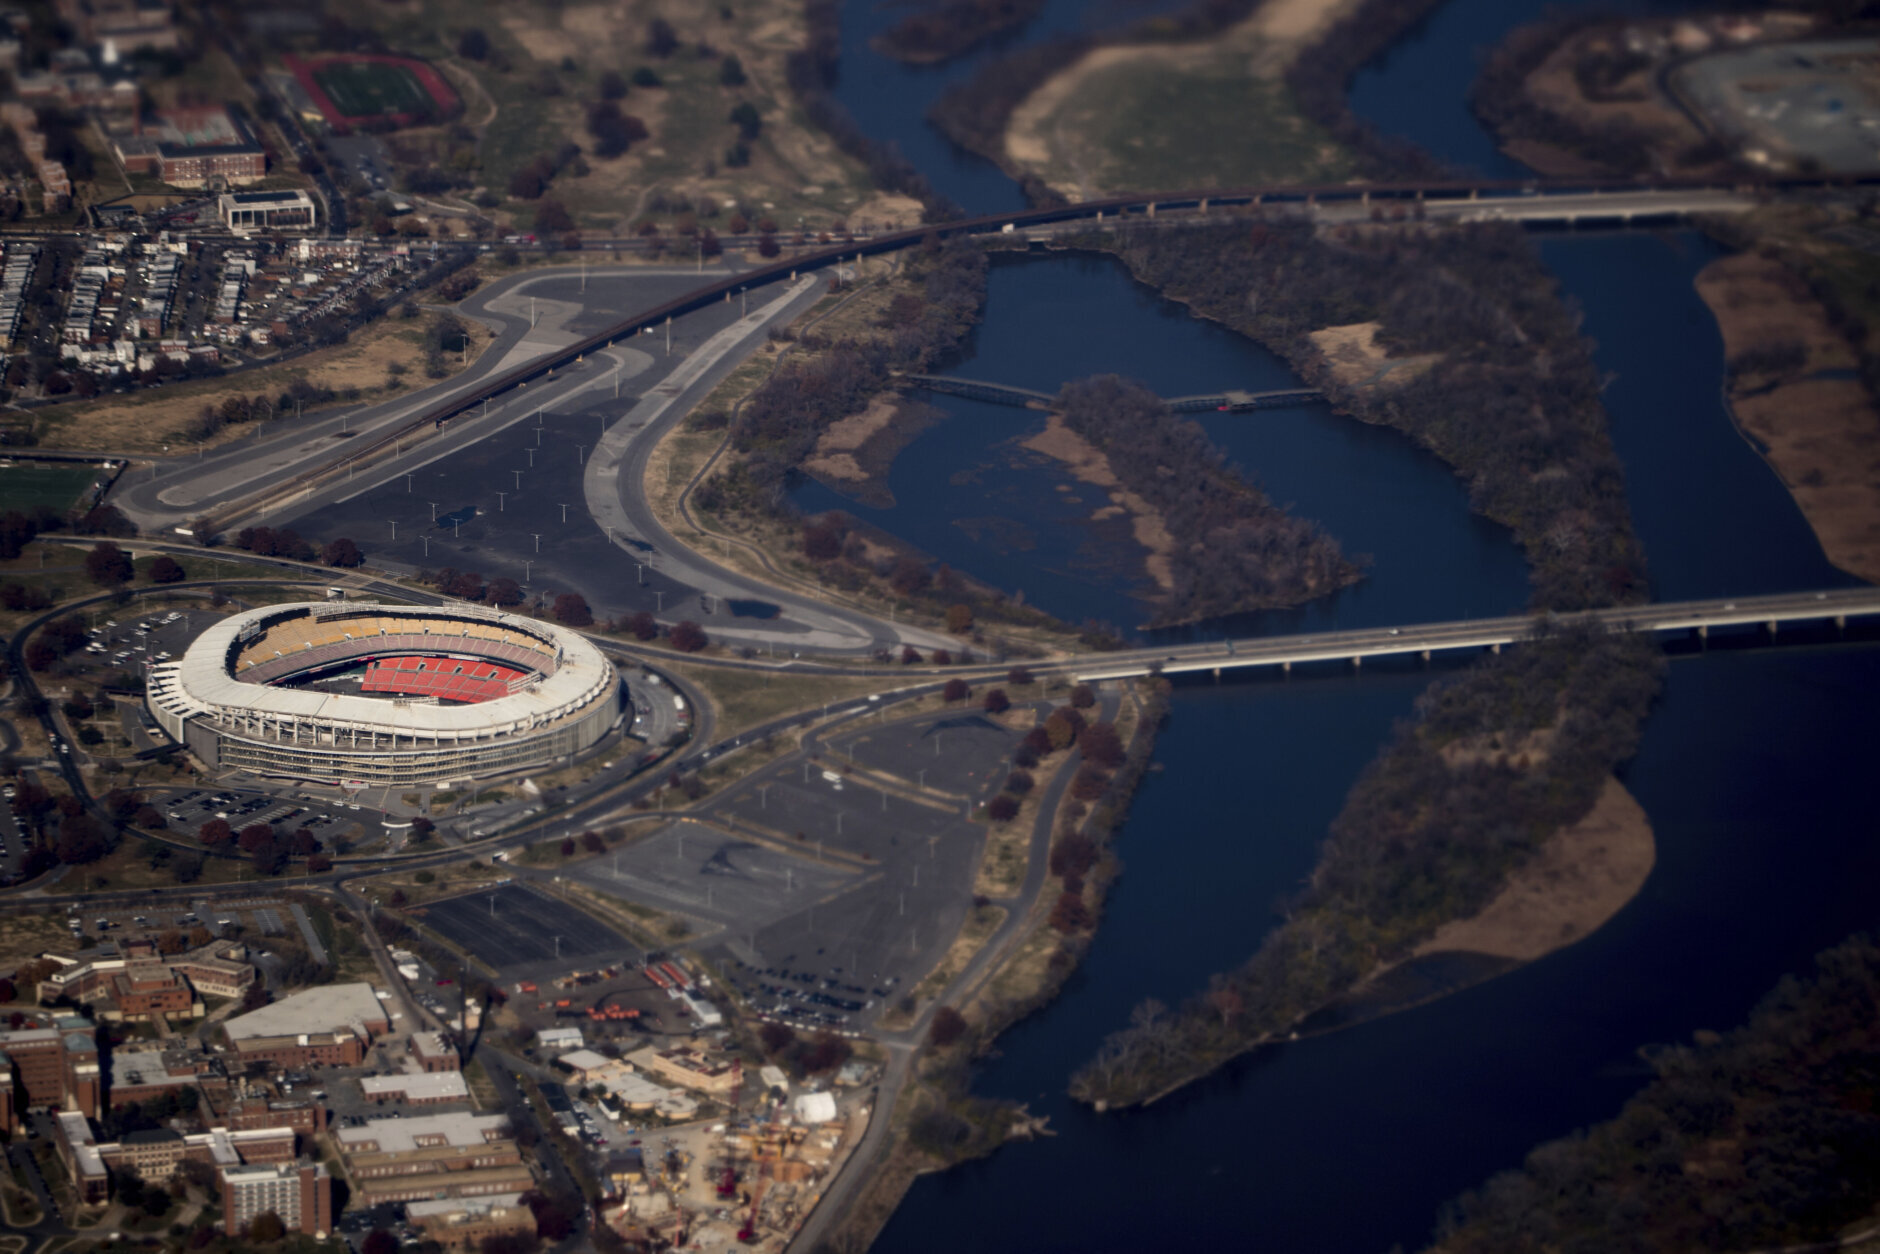 FILE - RFK Stadium is visible from Air Force One as it takes off from Andrews Air Force Base, Md., Wednesday, Nov. 29, 2017, as President Donald Trump flies to St. Louis to speak at a tax reform rally. The Washington Commanders say they are supporting efforts by the District of Columbia to get control of RFK Stadium site that used to be the home of the NFL team.
A team spokesperson said Thursday, May 4, 2023, officials are communicating with stakeholders at the federal and local levels about the RFK site. (AP Photo/Andrew Harnik, File)